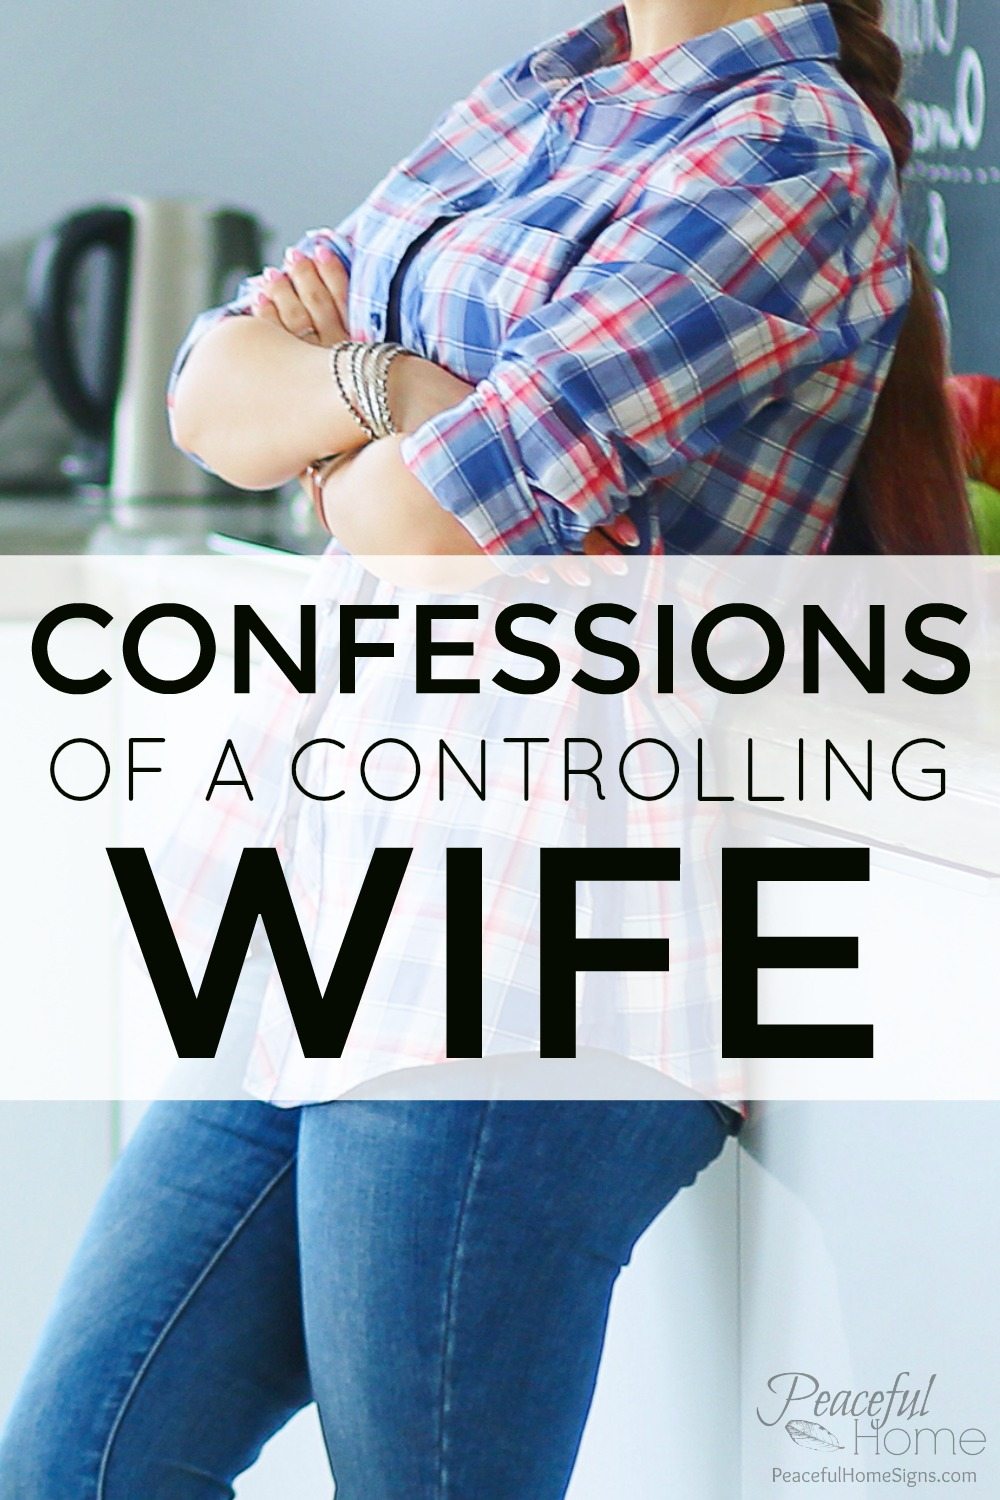 Confessions of a controlling wife | Controlling Christian Wife | Troubled Christian Marriage | Faith Based Marriage ideas | Stop controlling my husband | Marriage Problems | Save my marriage | Be a better wife | Be a better helpmate | Christian Marriage | God Centered Marriage